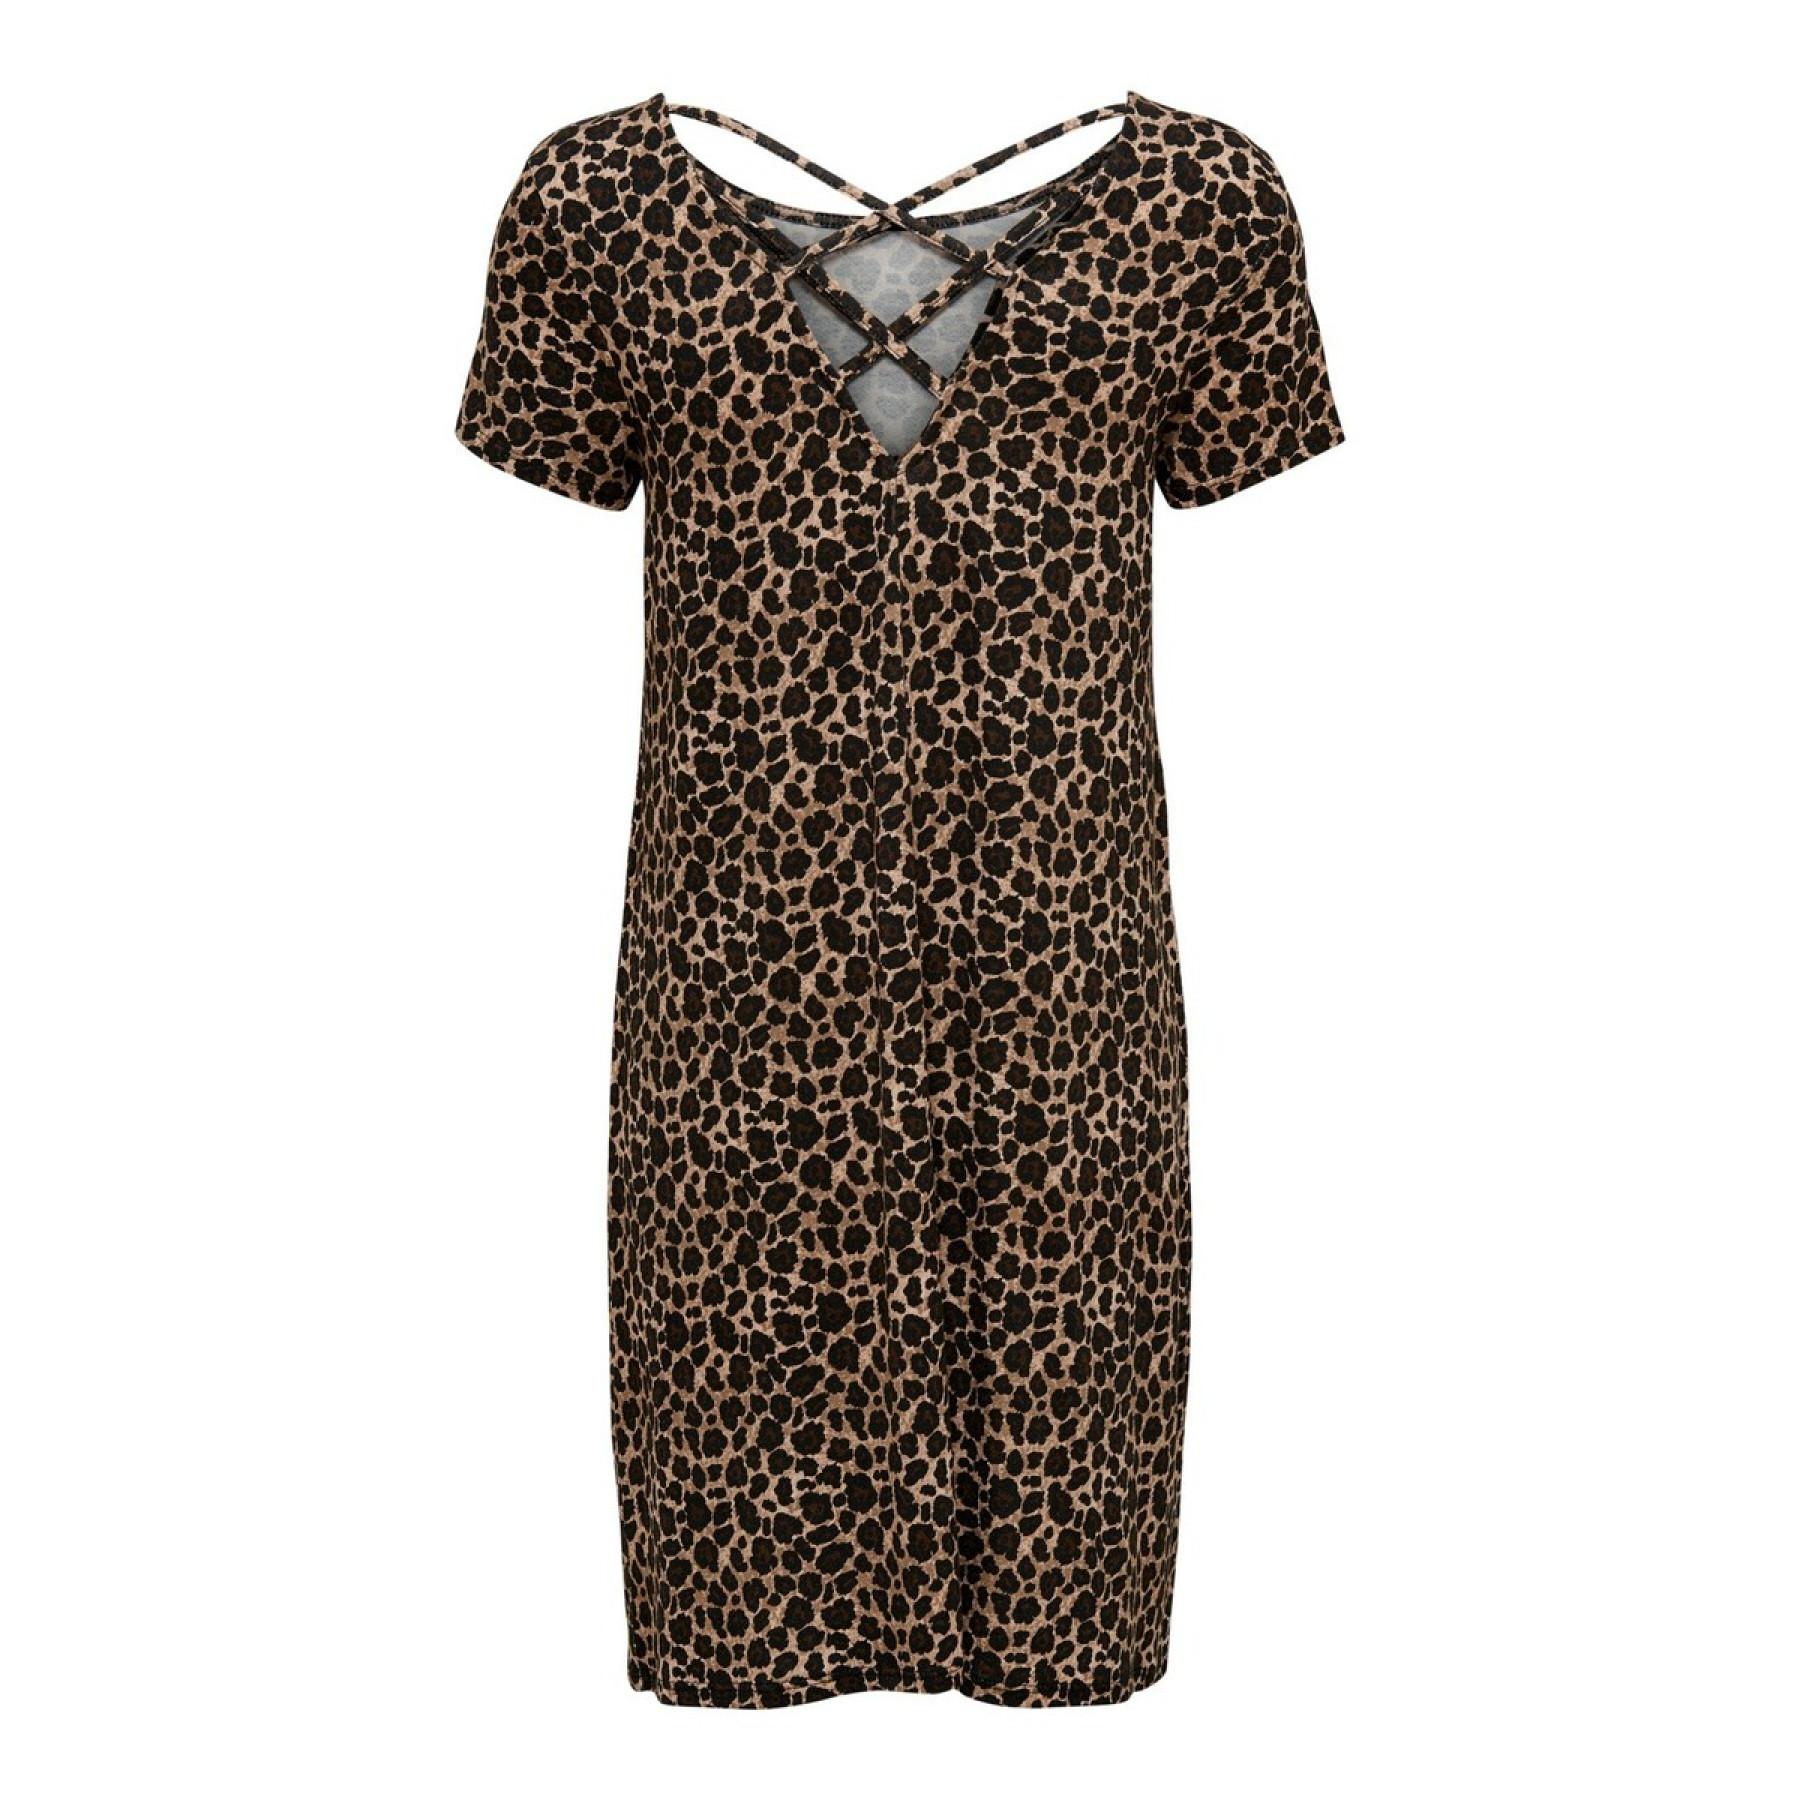 Robe femme Only Bera dos lacet